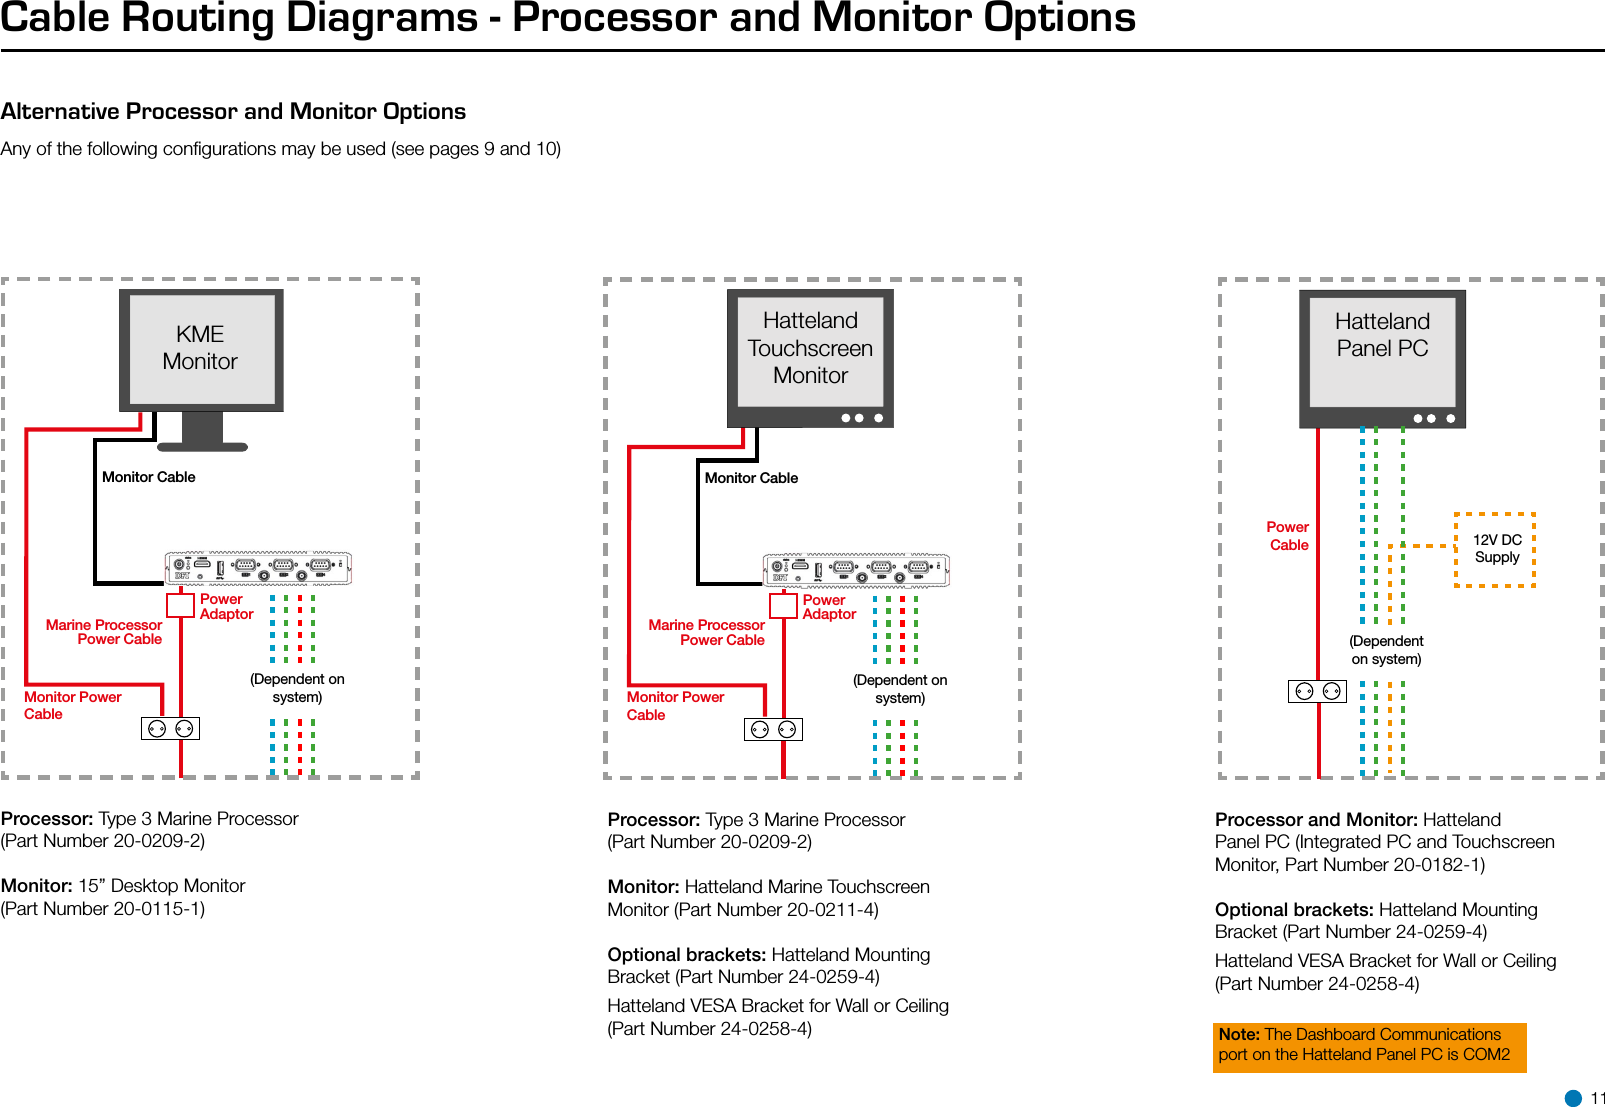 Cable Routing Diagrams - Processor and Monitor OptionsAlternative Processor and Monitor OptionsAny of the following conﬁgurations may be used (see pages 9 and 10)Processor: Type 3 Marine Processor (Part Number 20-0209-2)Monitor: 15” Desktop Monitor (Part Number 20-0115-1)KME MonitorMonitor PowerCableMonitor CablePower AdaptorMarine Processor Power CableProcessor: Type 3 Marine Processor (Part Number 20-0209-2)Monitor: Hatteland Marine Touchscreen Monitor (Part Number 20-0211-4)Optional brackets: Hatteland Mounting Bracket (Part Number 24-0259-4)Hatteland VESA Bracket for Wall or Ceiling (Part Number 24-0258-4)Power CableProcessor and Monitor: HattelandPanel PC (Integrated PC and TouchscreenMonitor, Part Number 20-0182-1)Optional brackets: Hatteland Mounting Bracket (Part Number 24-0259-4)Hatteland VESA Bracket for Wall or Ceiling (Part Number 24-0258-4)Hatteland Panel PCNote: The Dashboard Communicationsport on the Hatteland Panel PC is COM2(Dependent on system) Monitor PowerCableMonitor CablePower AdaptorMarine Processor Power Cable(Dependent on system)Hatteland Touchscreen Monitor(Dependenton system)12V DCSupply 11